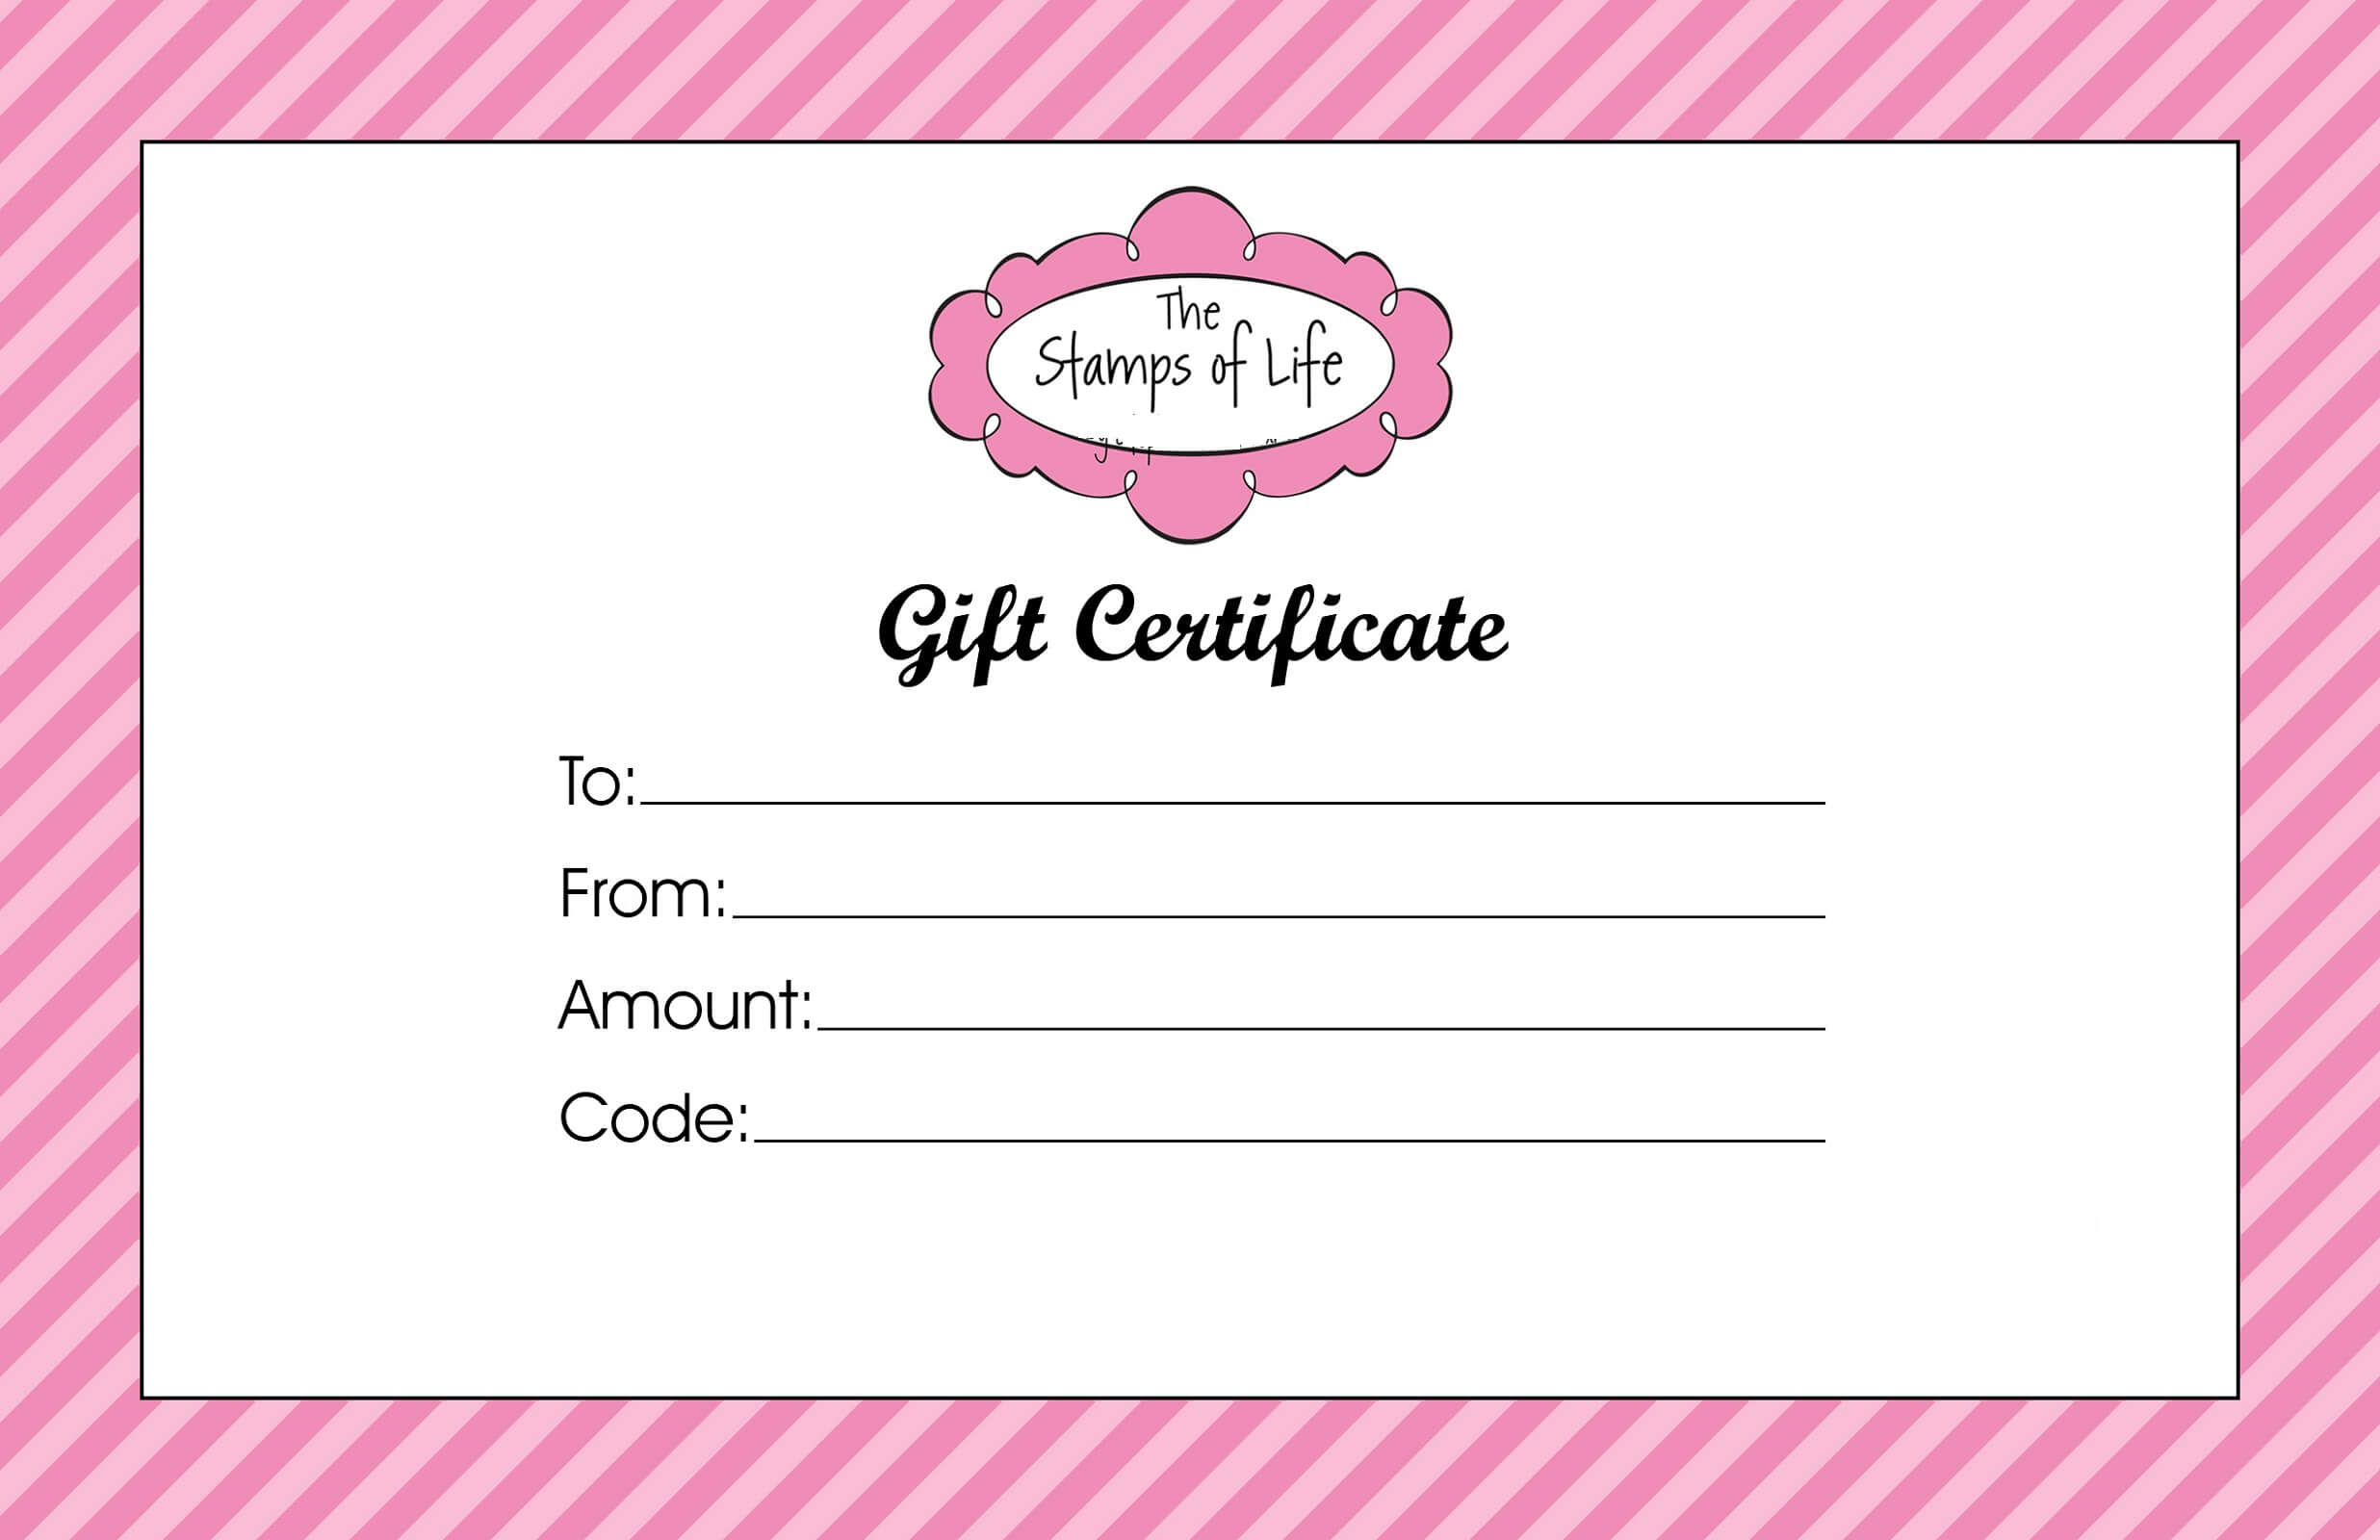 Gift Certificate Templates To Print | Activity Shelter Inside Pink Gift Certificate Template